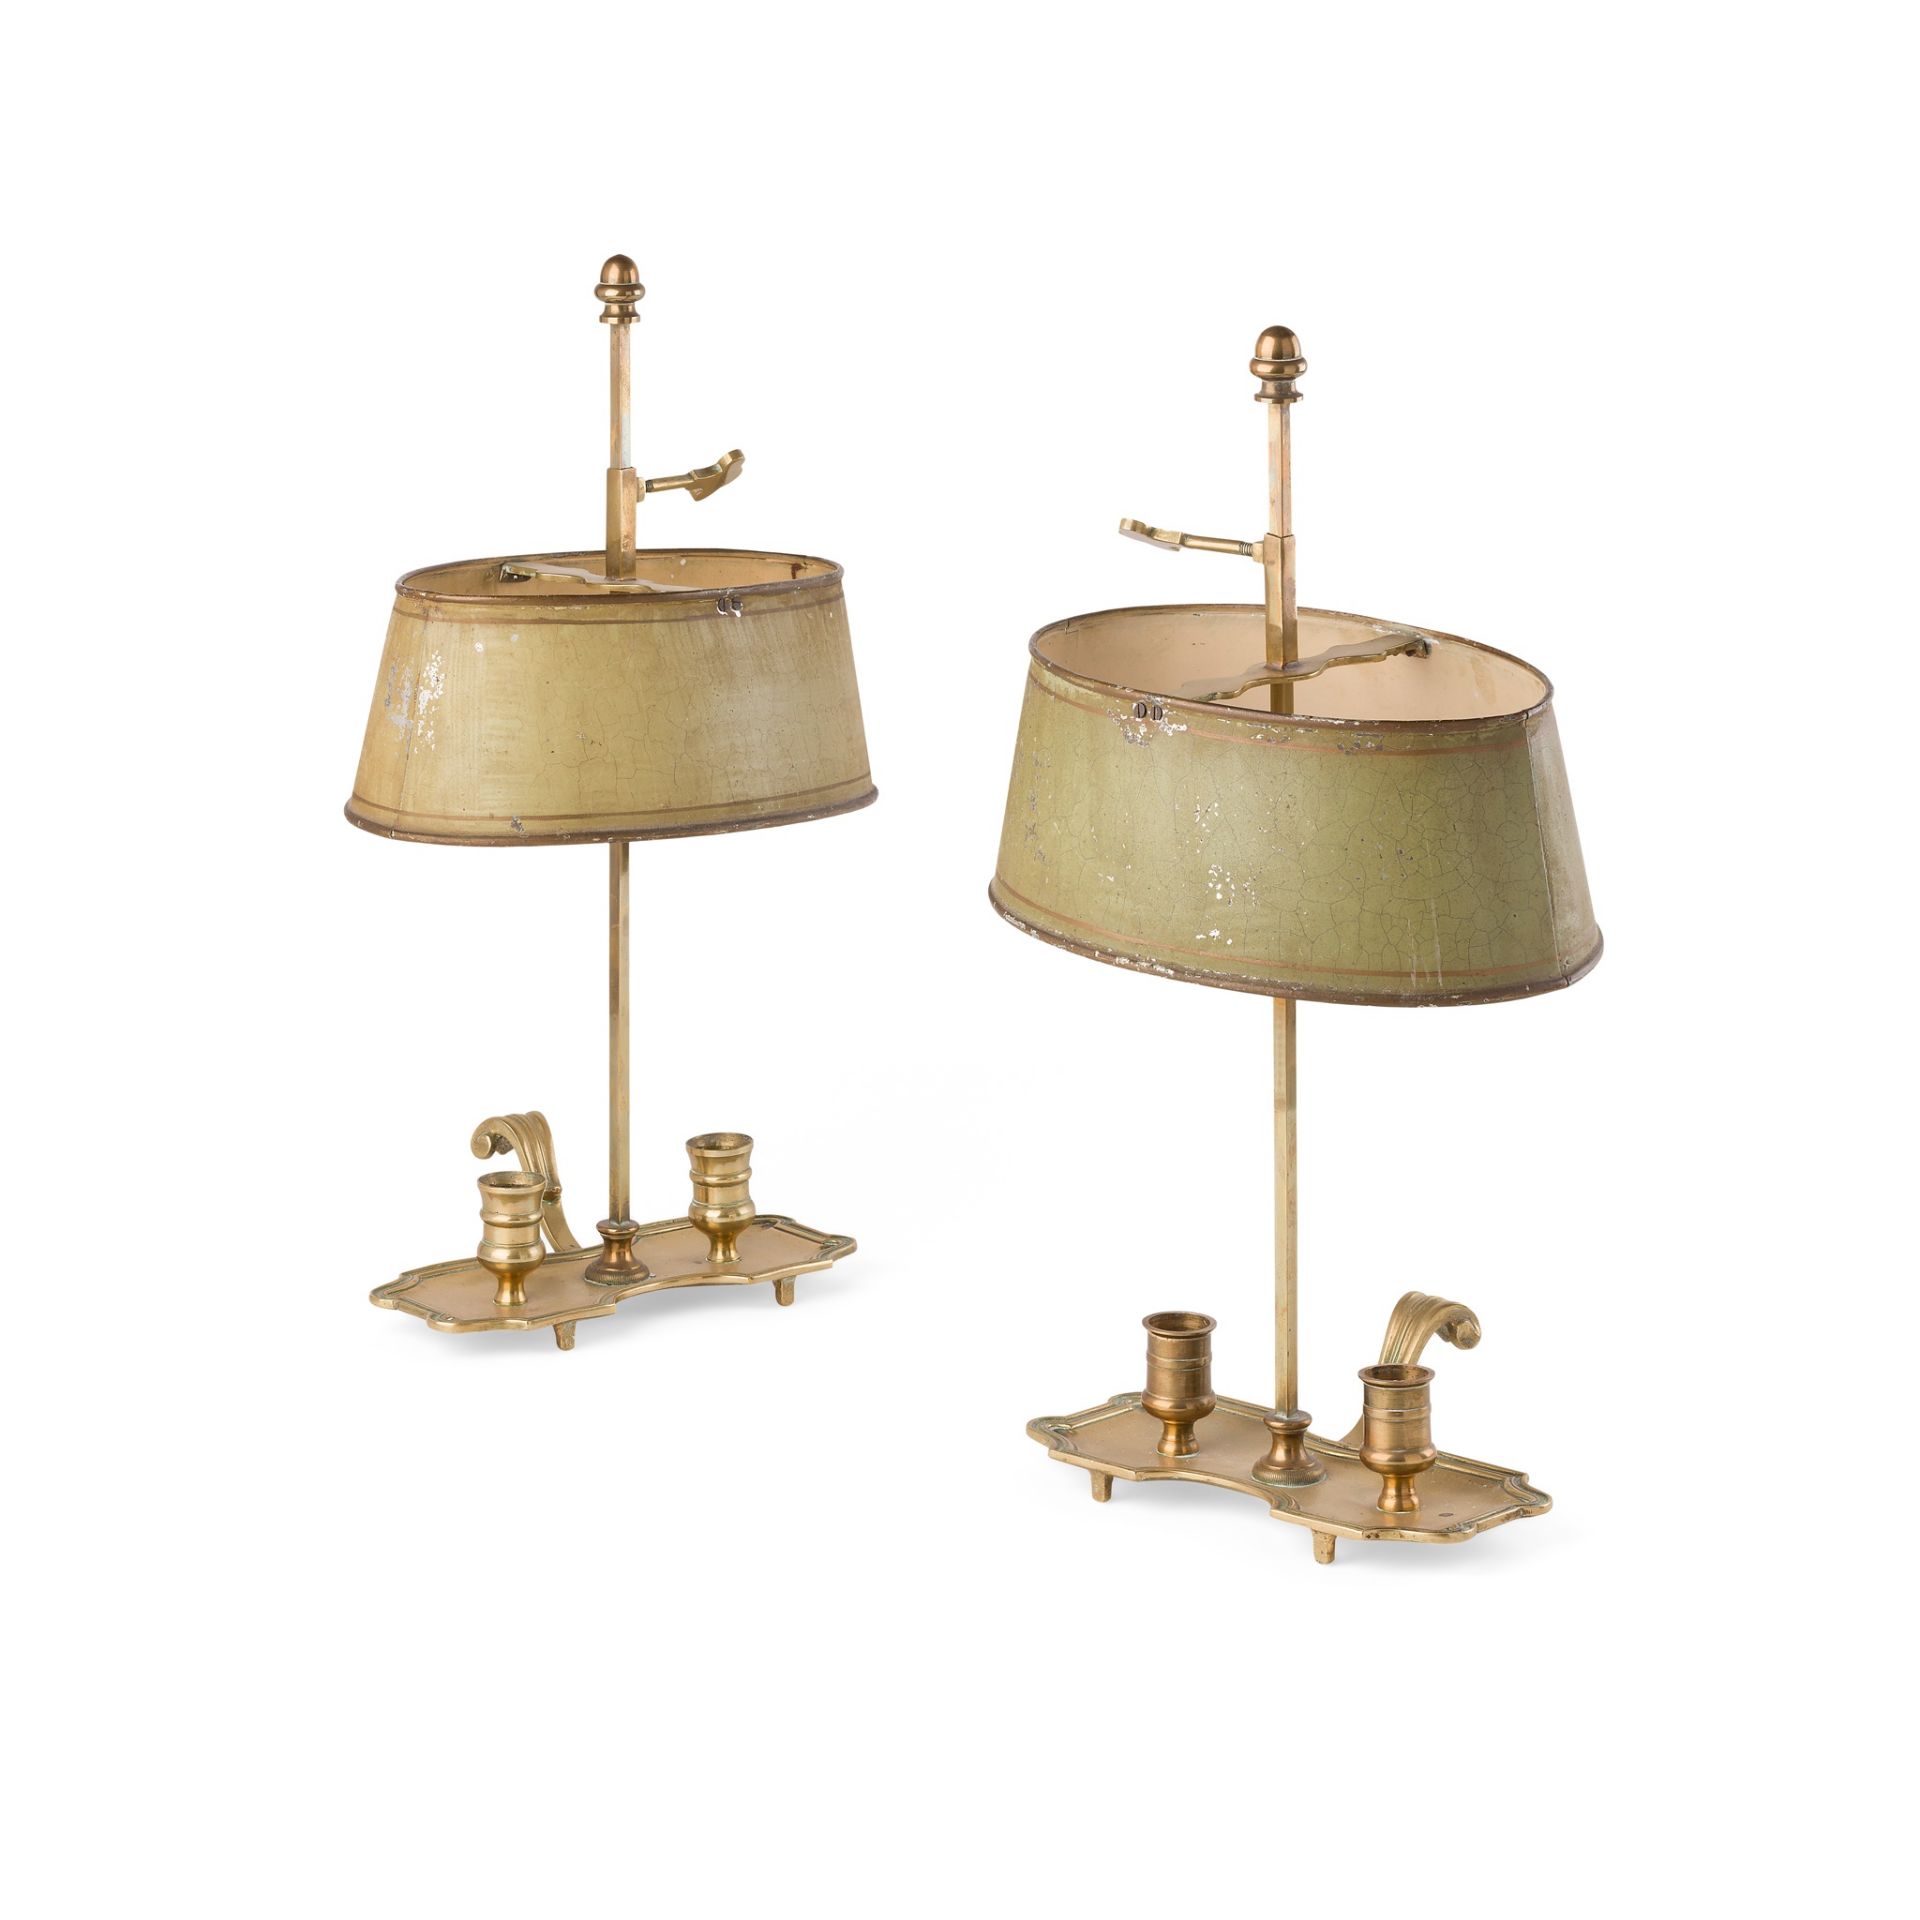 PAIR OF GEORGE III BRASS AND TOLE BOUILLOTTE LAMPS LATE 18TH/EARLY 19TH CENTURY